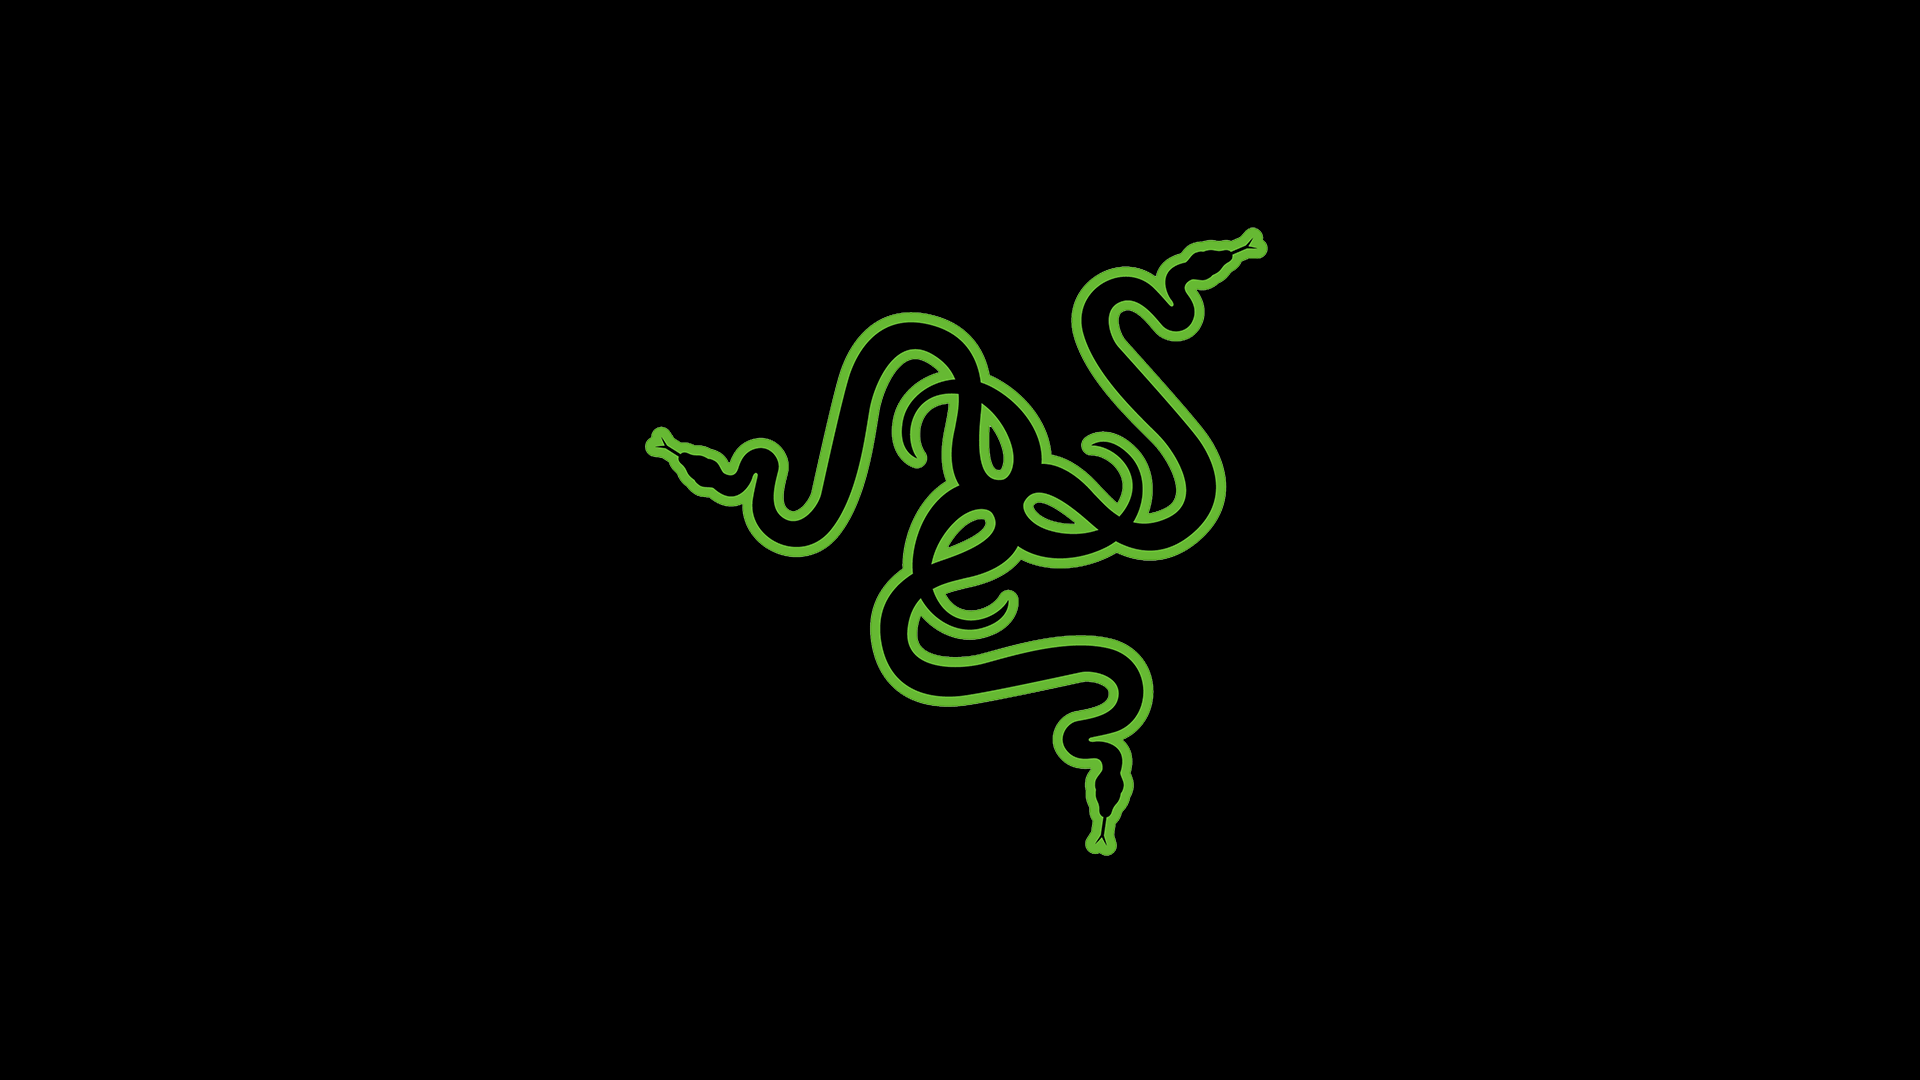 1920x1080) Made this minimalist wallpaper for Razer fans